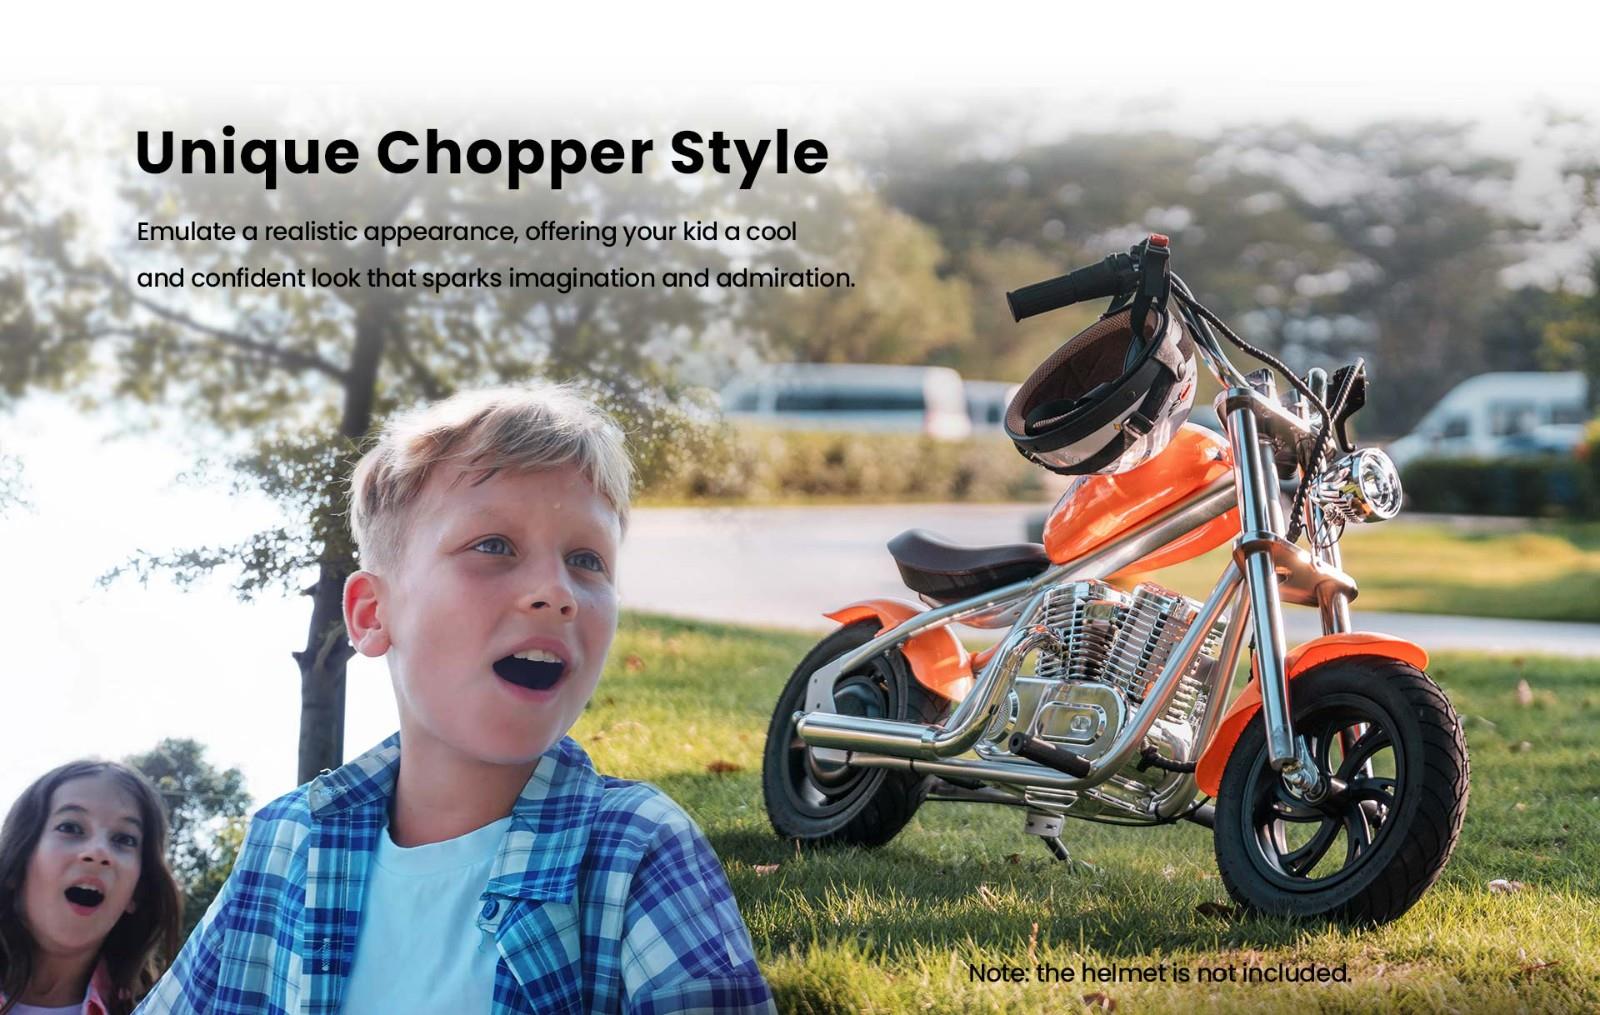 Hyper GOGO Challenger 12 Plus Electric Motorcycle with App for Kids, 12 x 3 Tires, 160W, 5.2Ah, Bluetooth Speaker - Blue